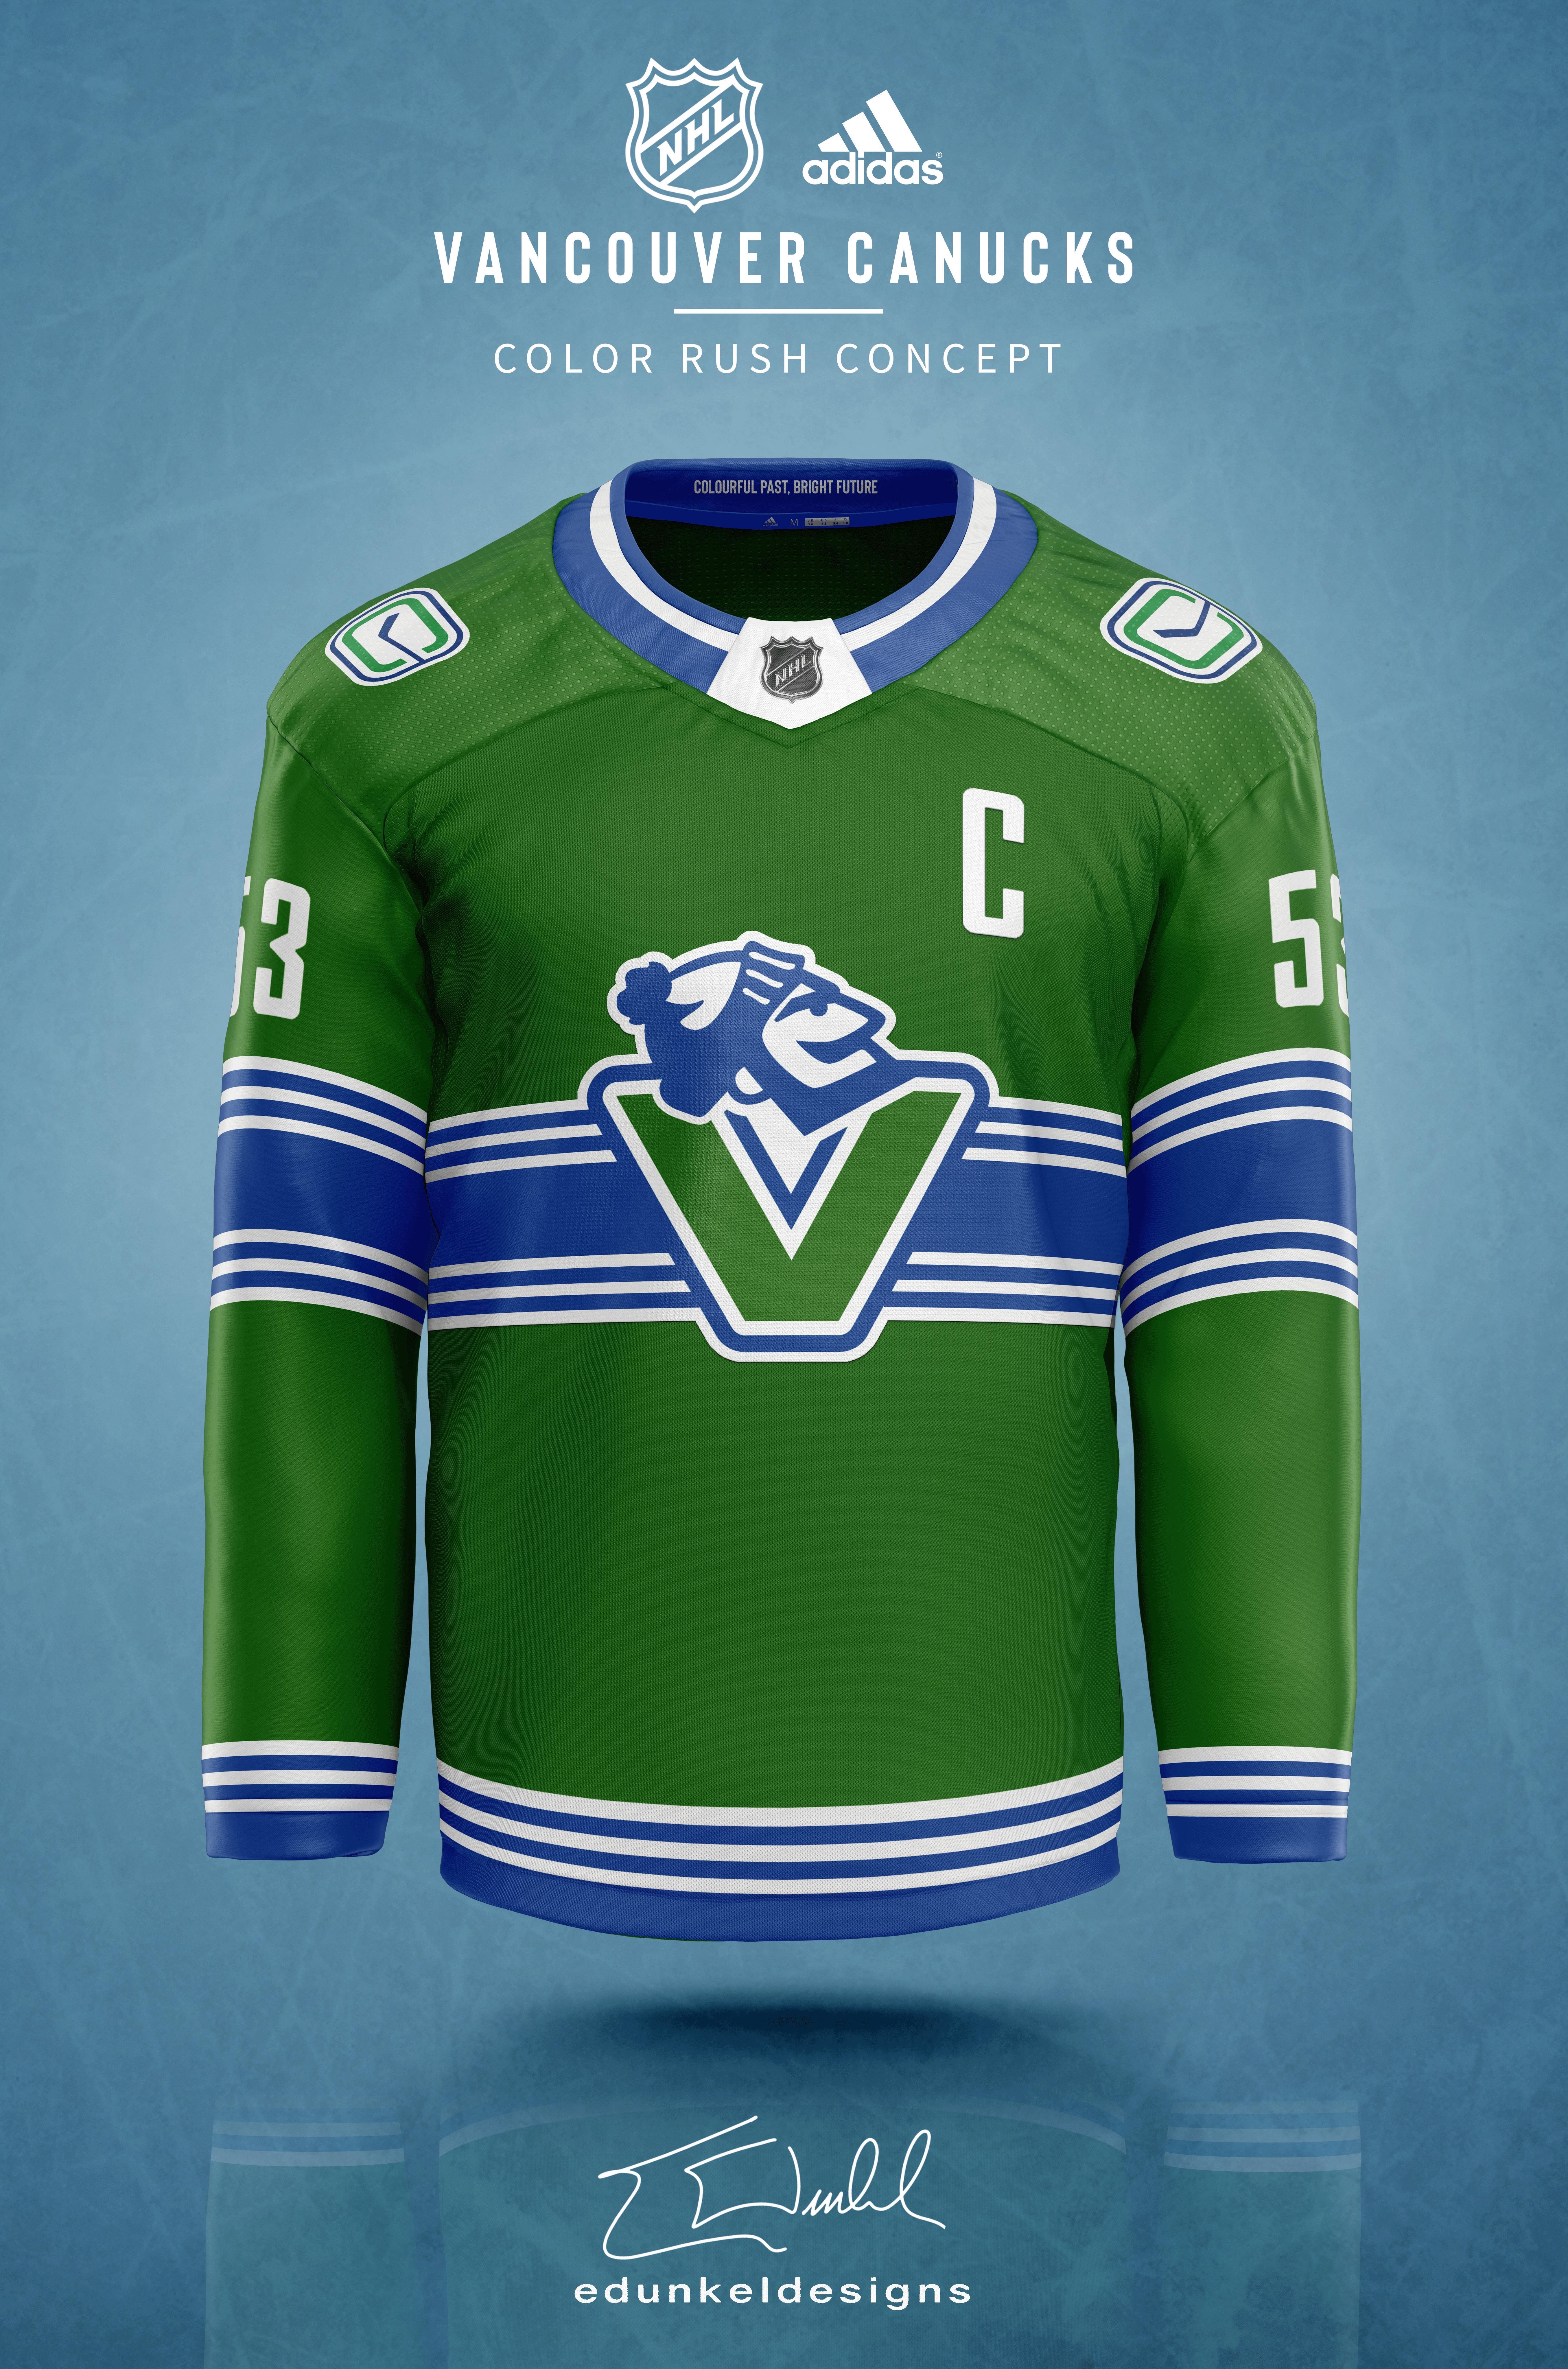 NHL Color Rush Concepts (Central Division)